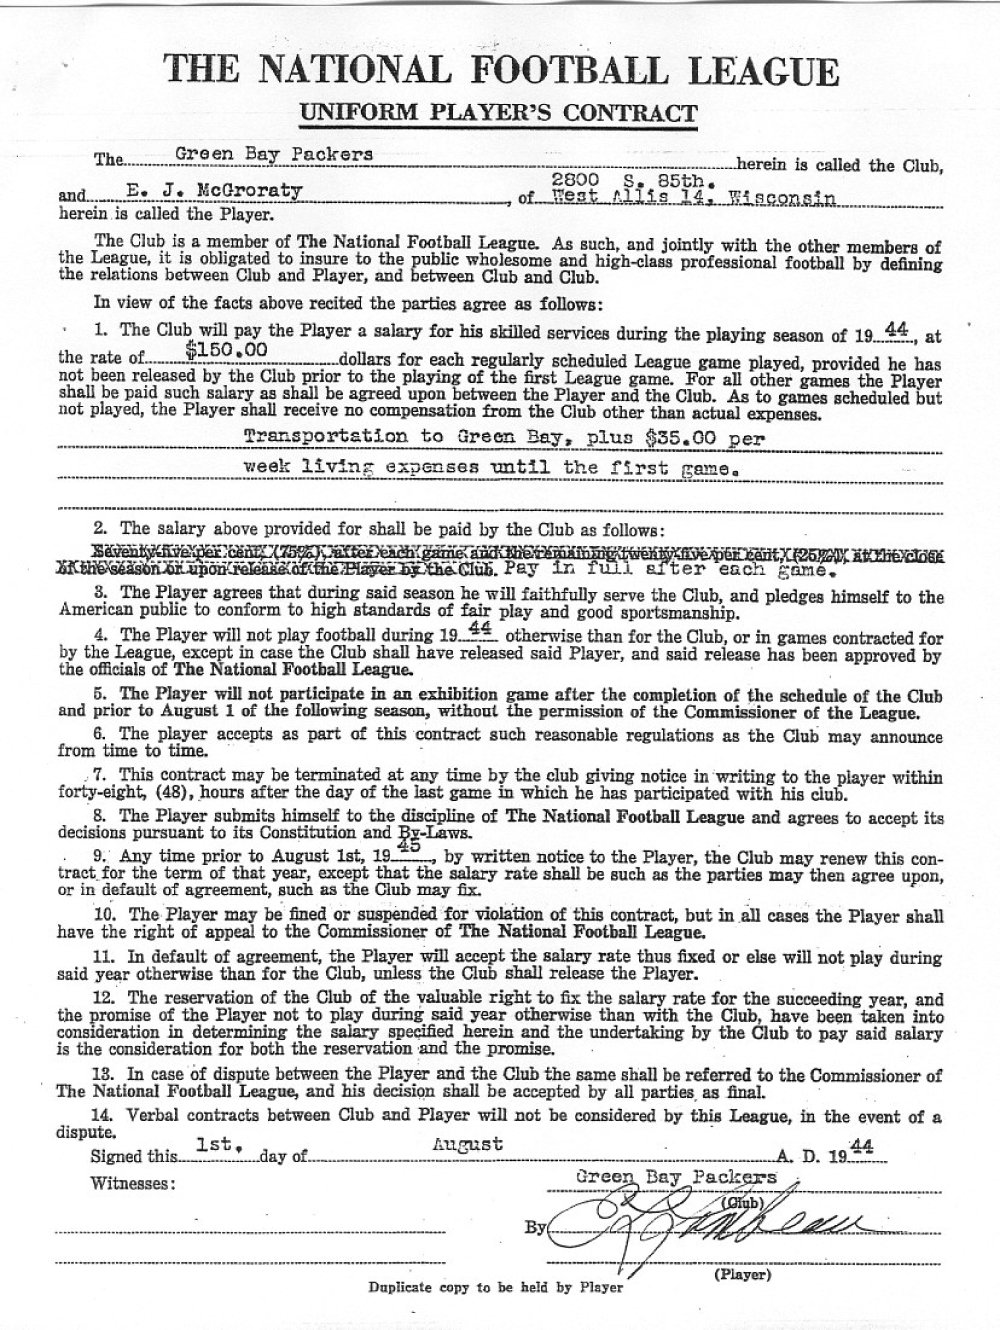 NFL Player contract from 1944